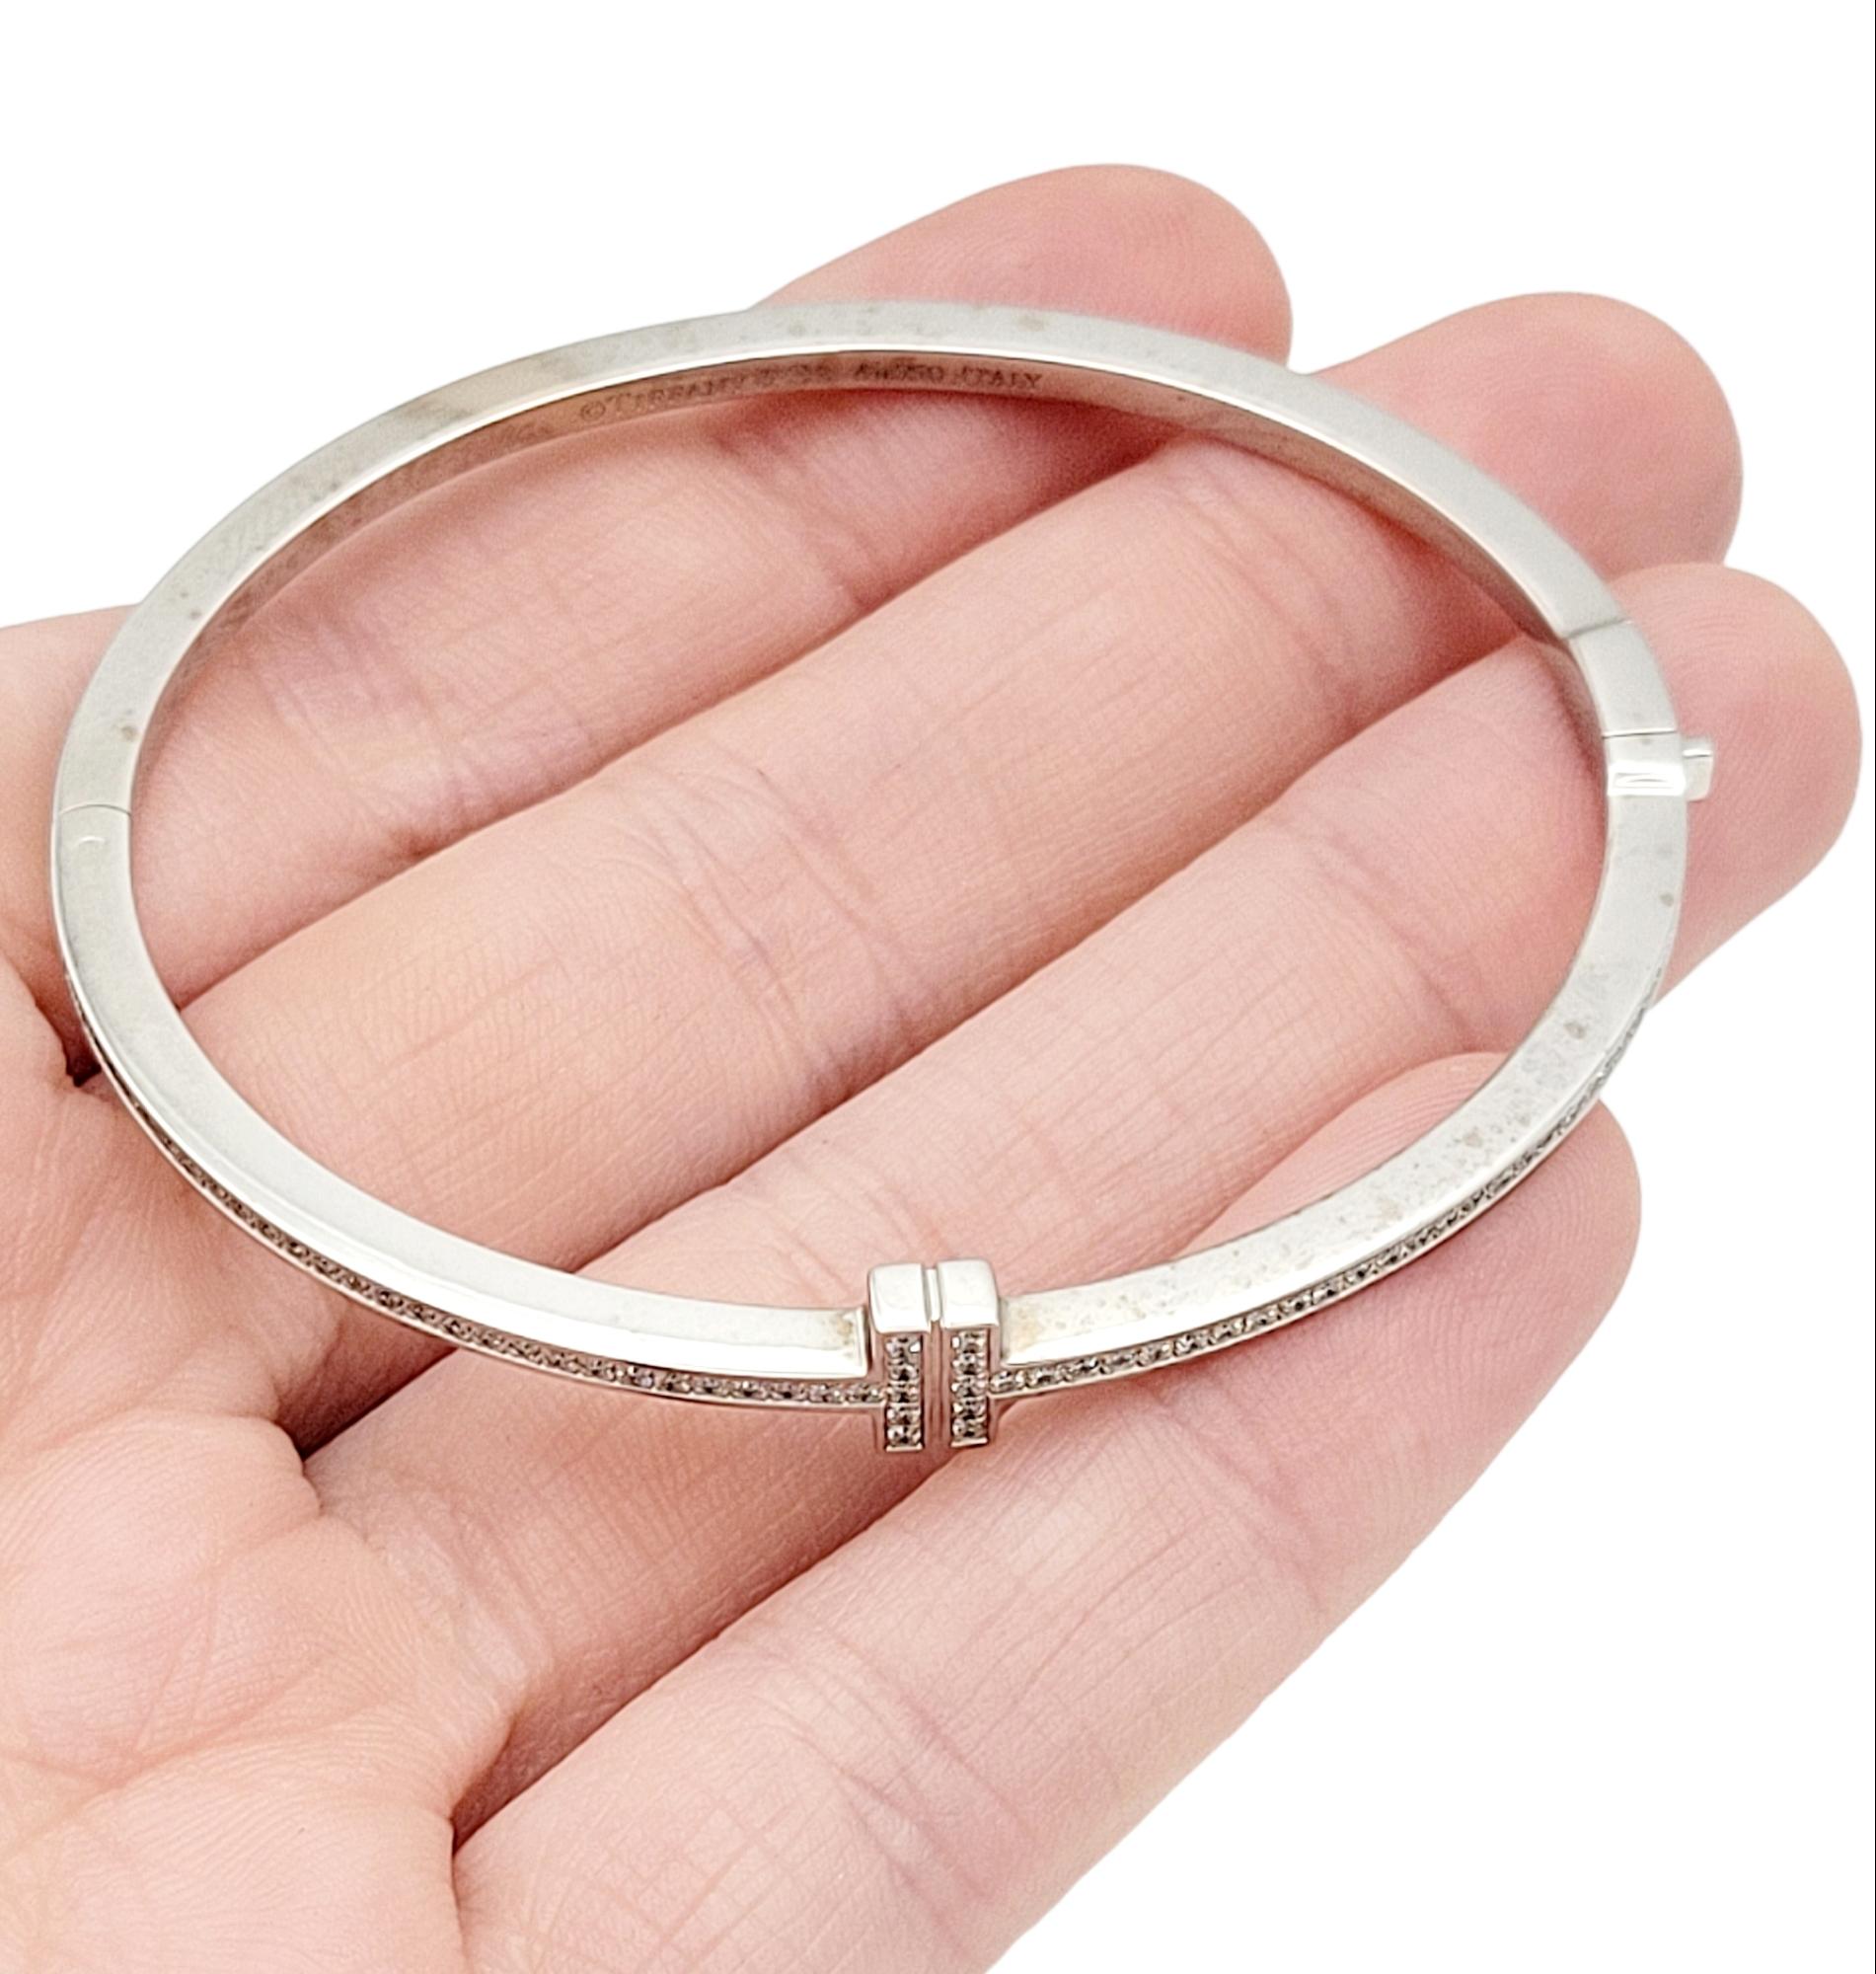 Tiffany & Co. Tiffany T Diamond Hinged Wire Bangle Bracelet in 18k White Gold For Sale 3